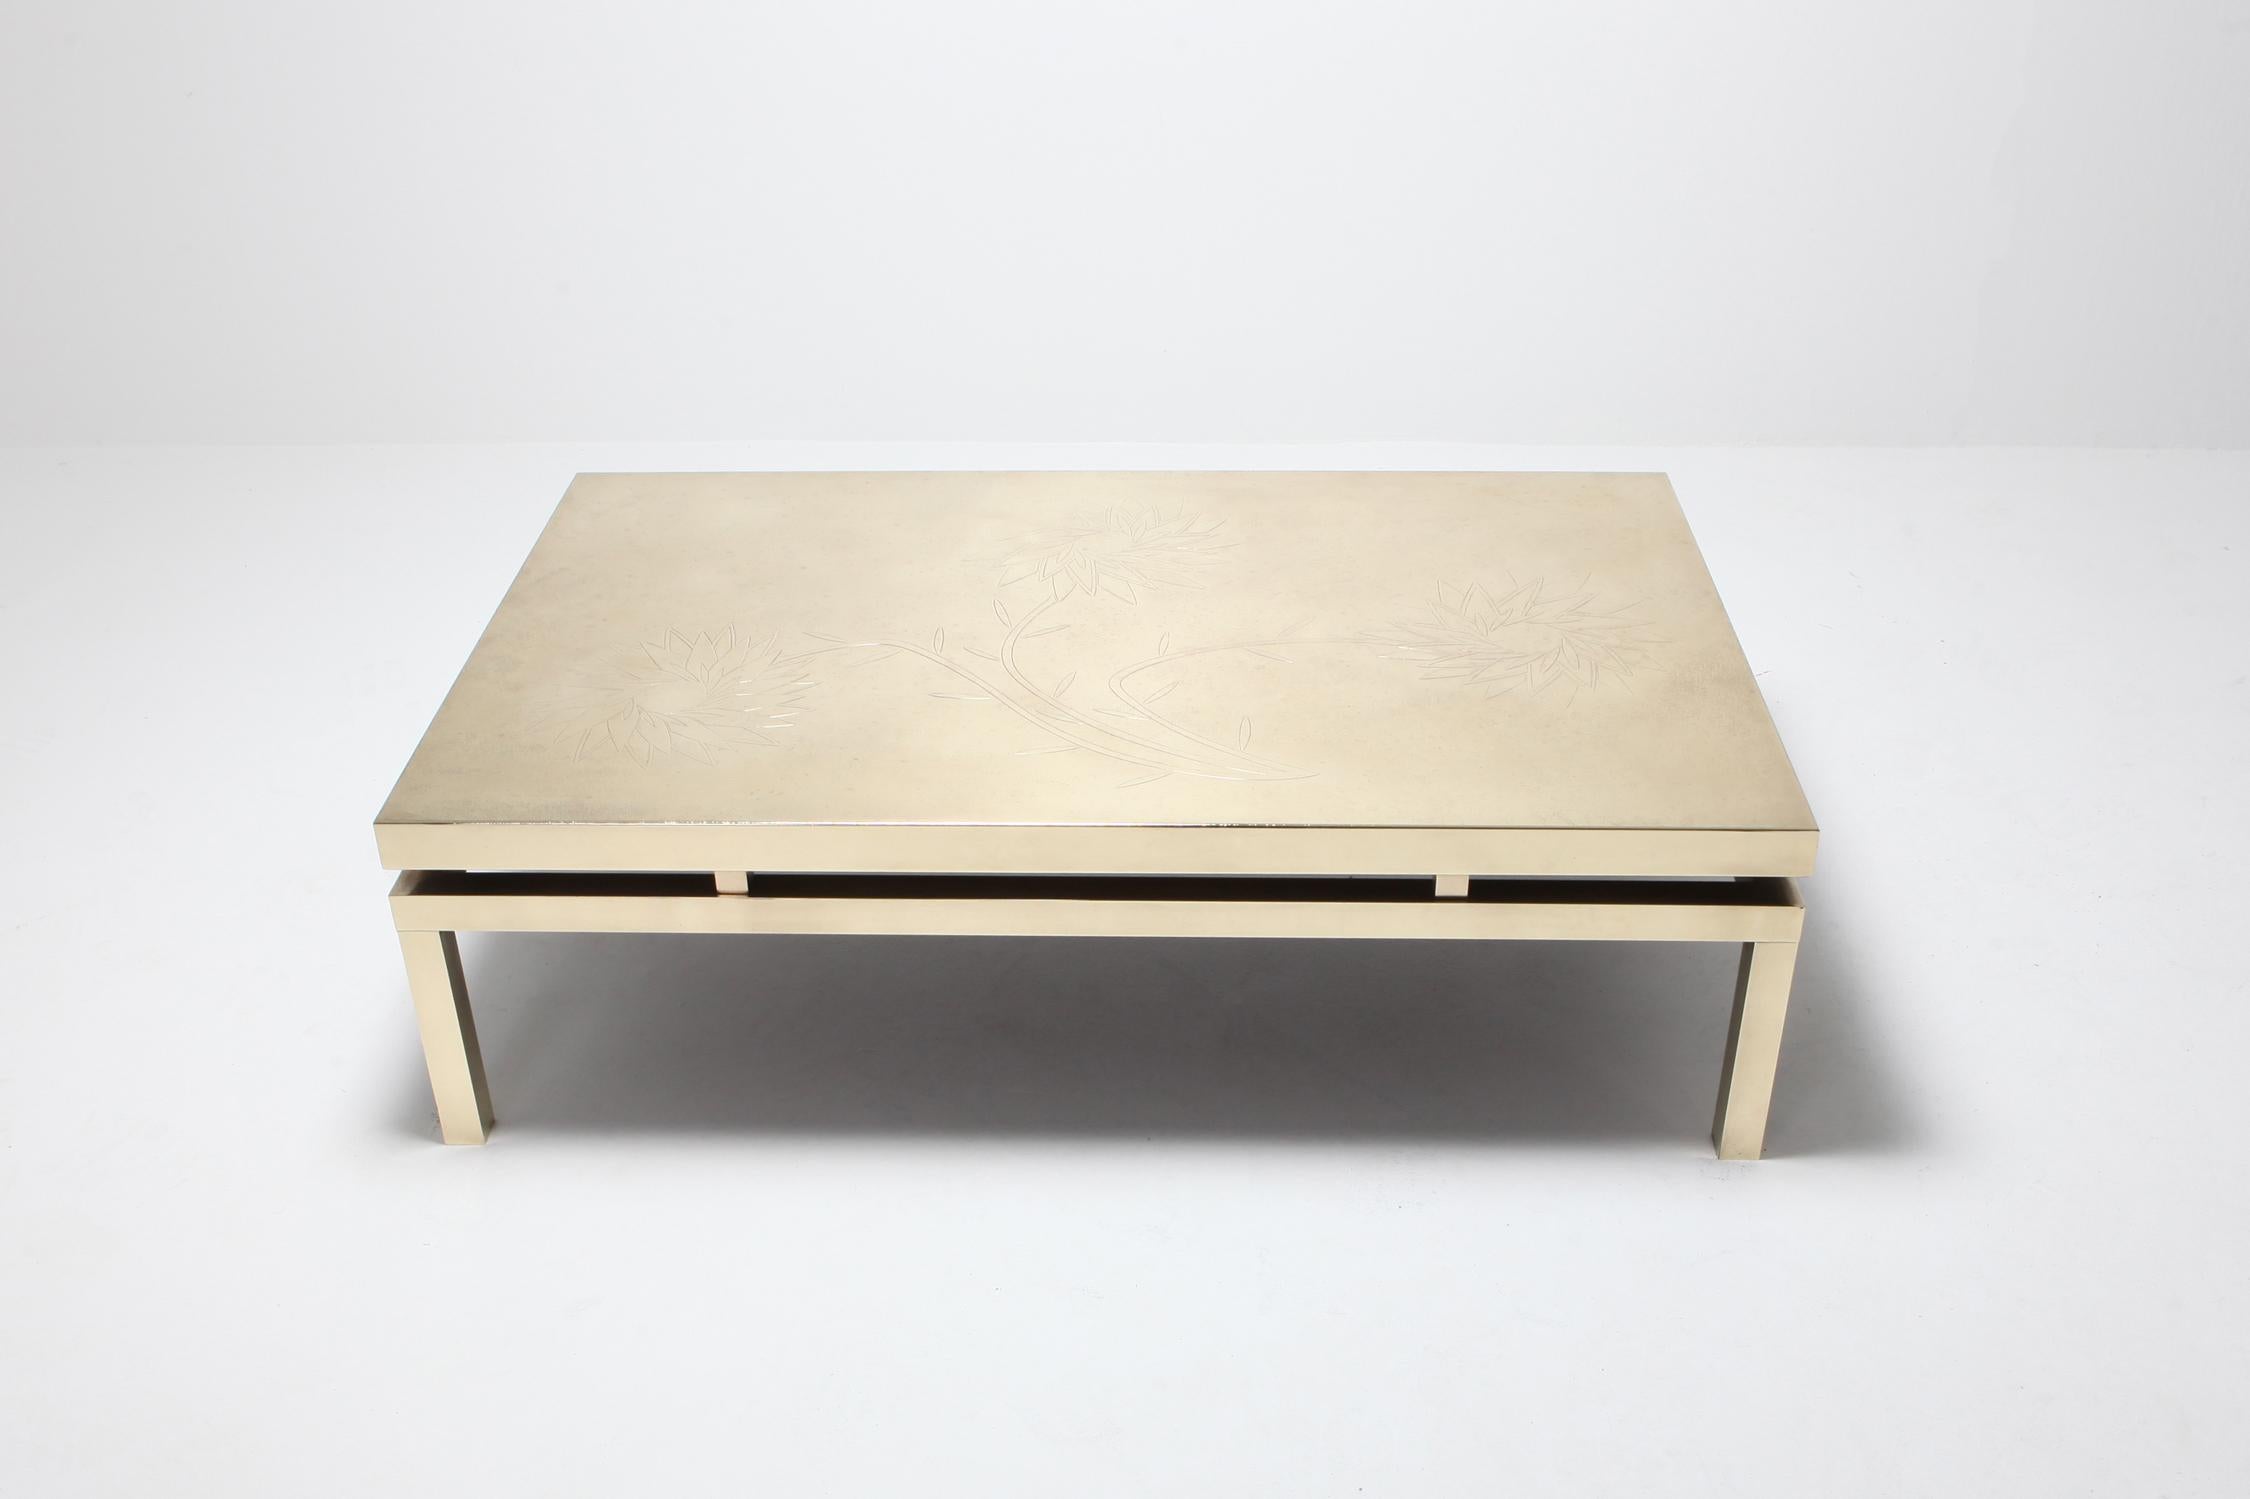 Belgian Brass Etched Coffee Table by Willy Daro, International Style, Belgium, 1970s For Sale